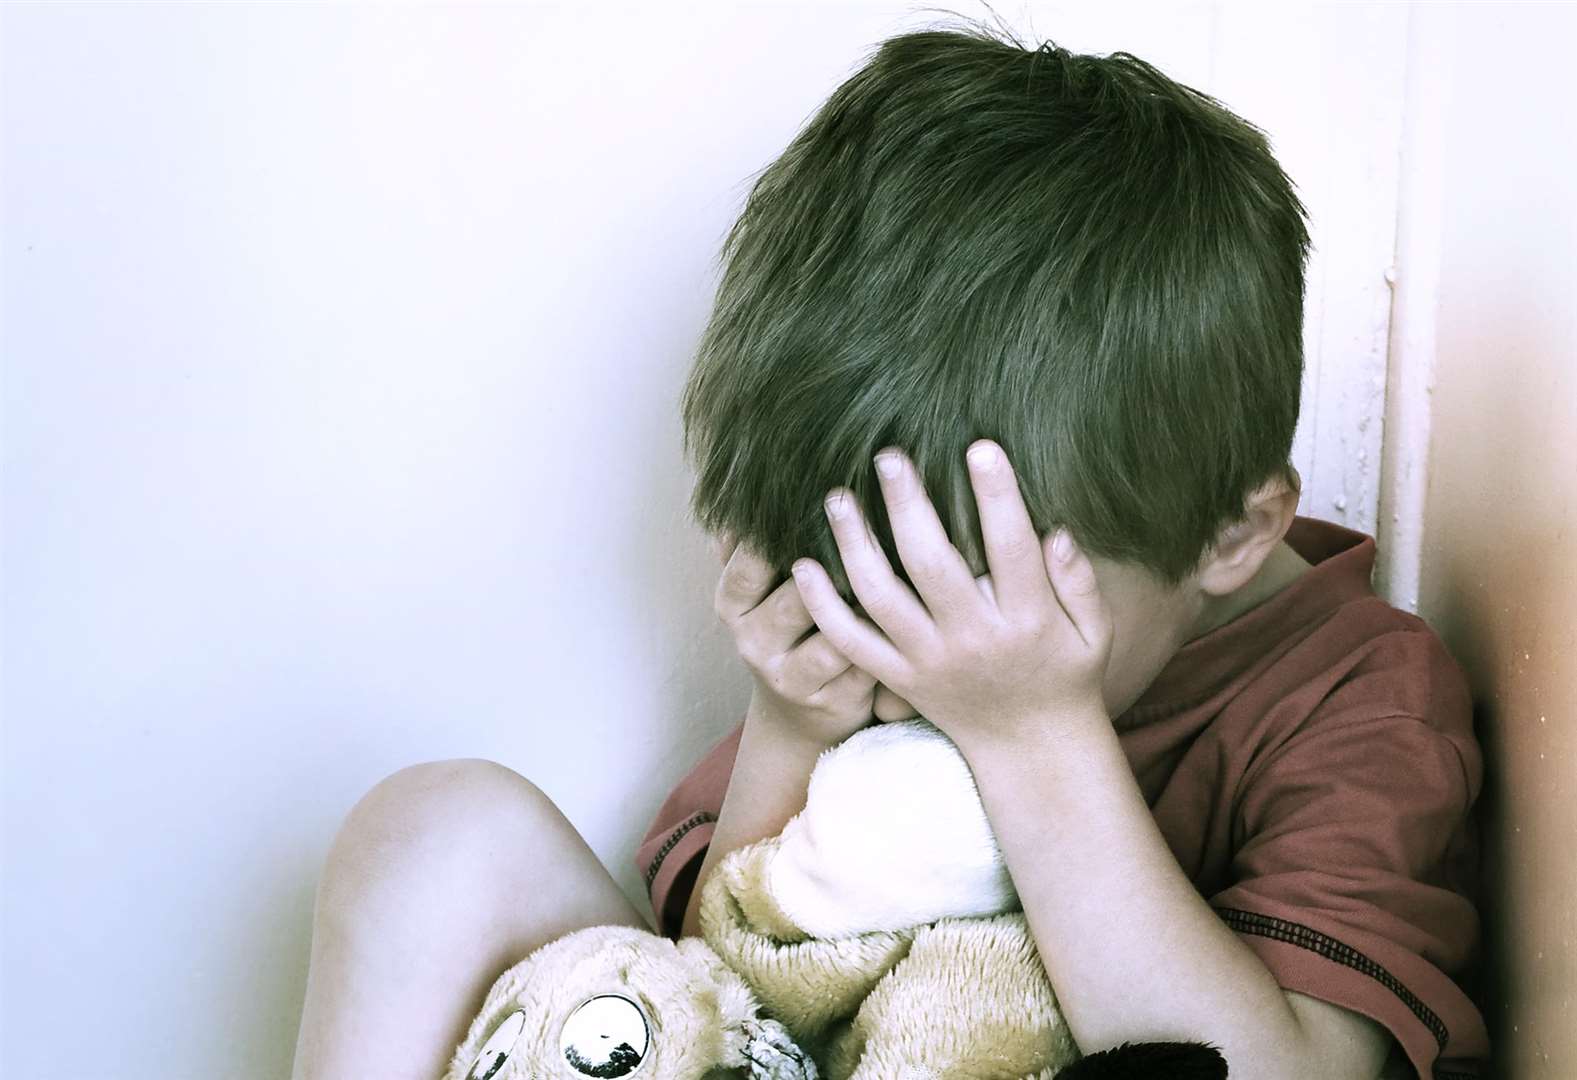 Poor language, communication or social skills can be a sign of child abuse. Stock image